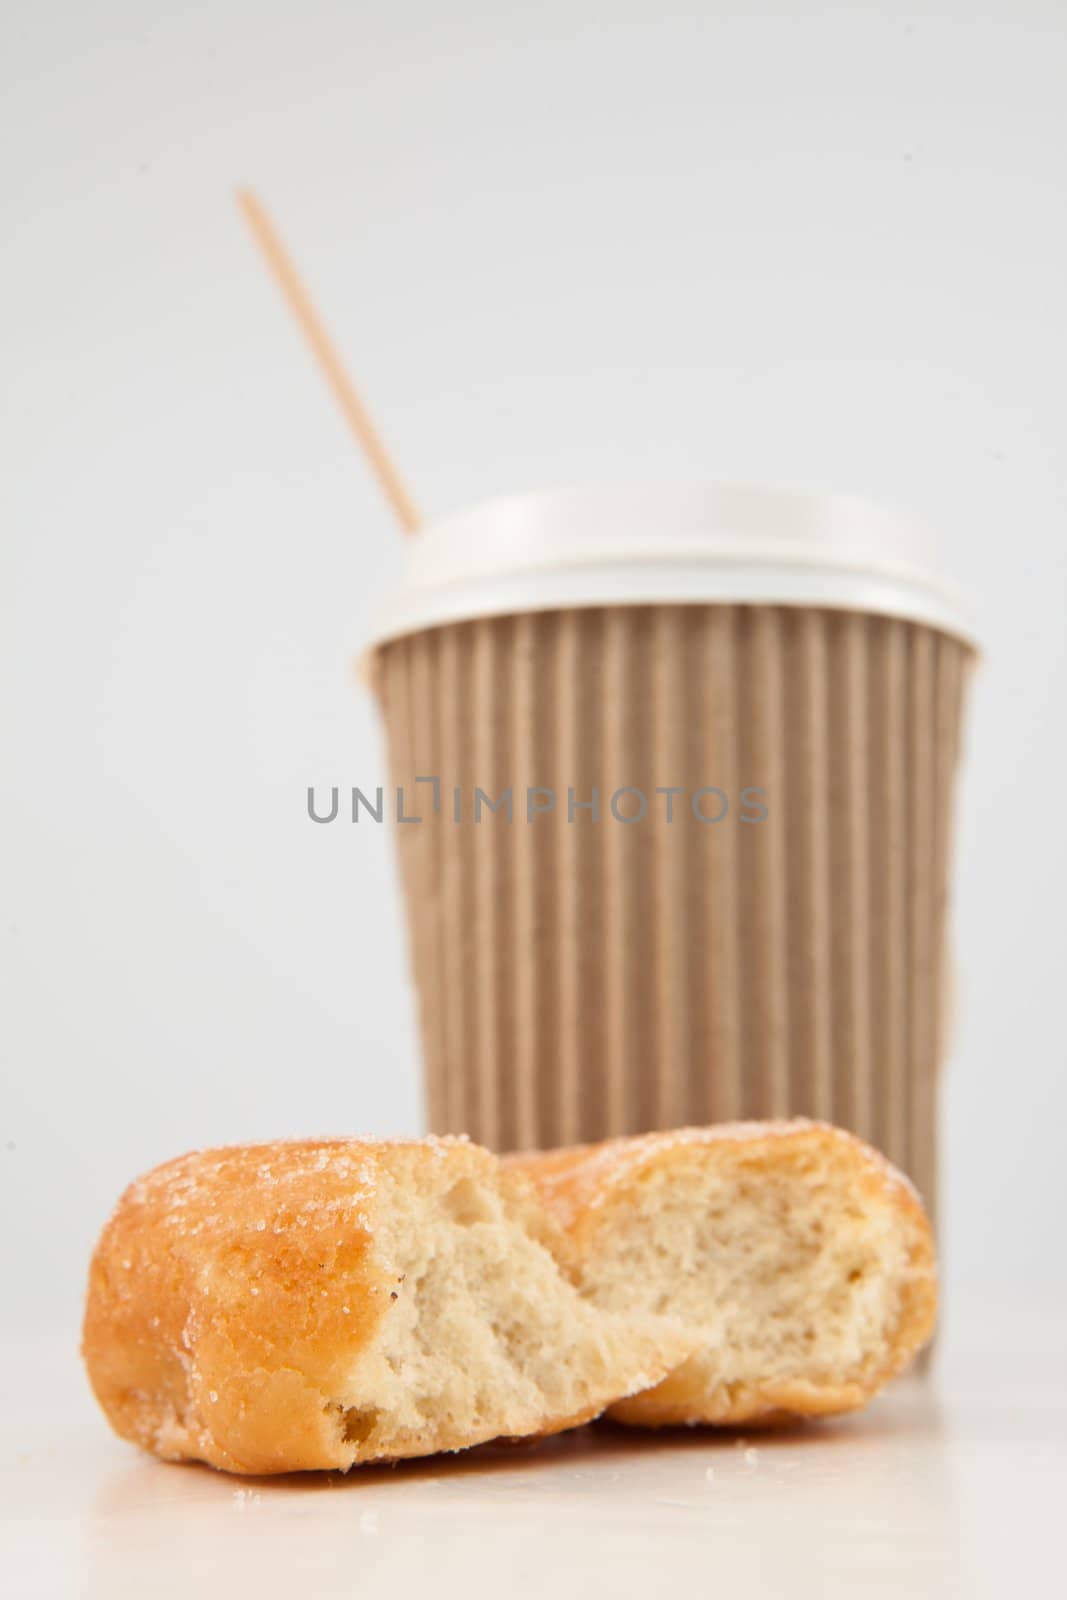 An half eaten doughnut and a cup of tea placed together by Wavebreakmedia